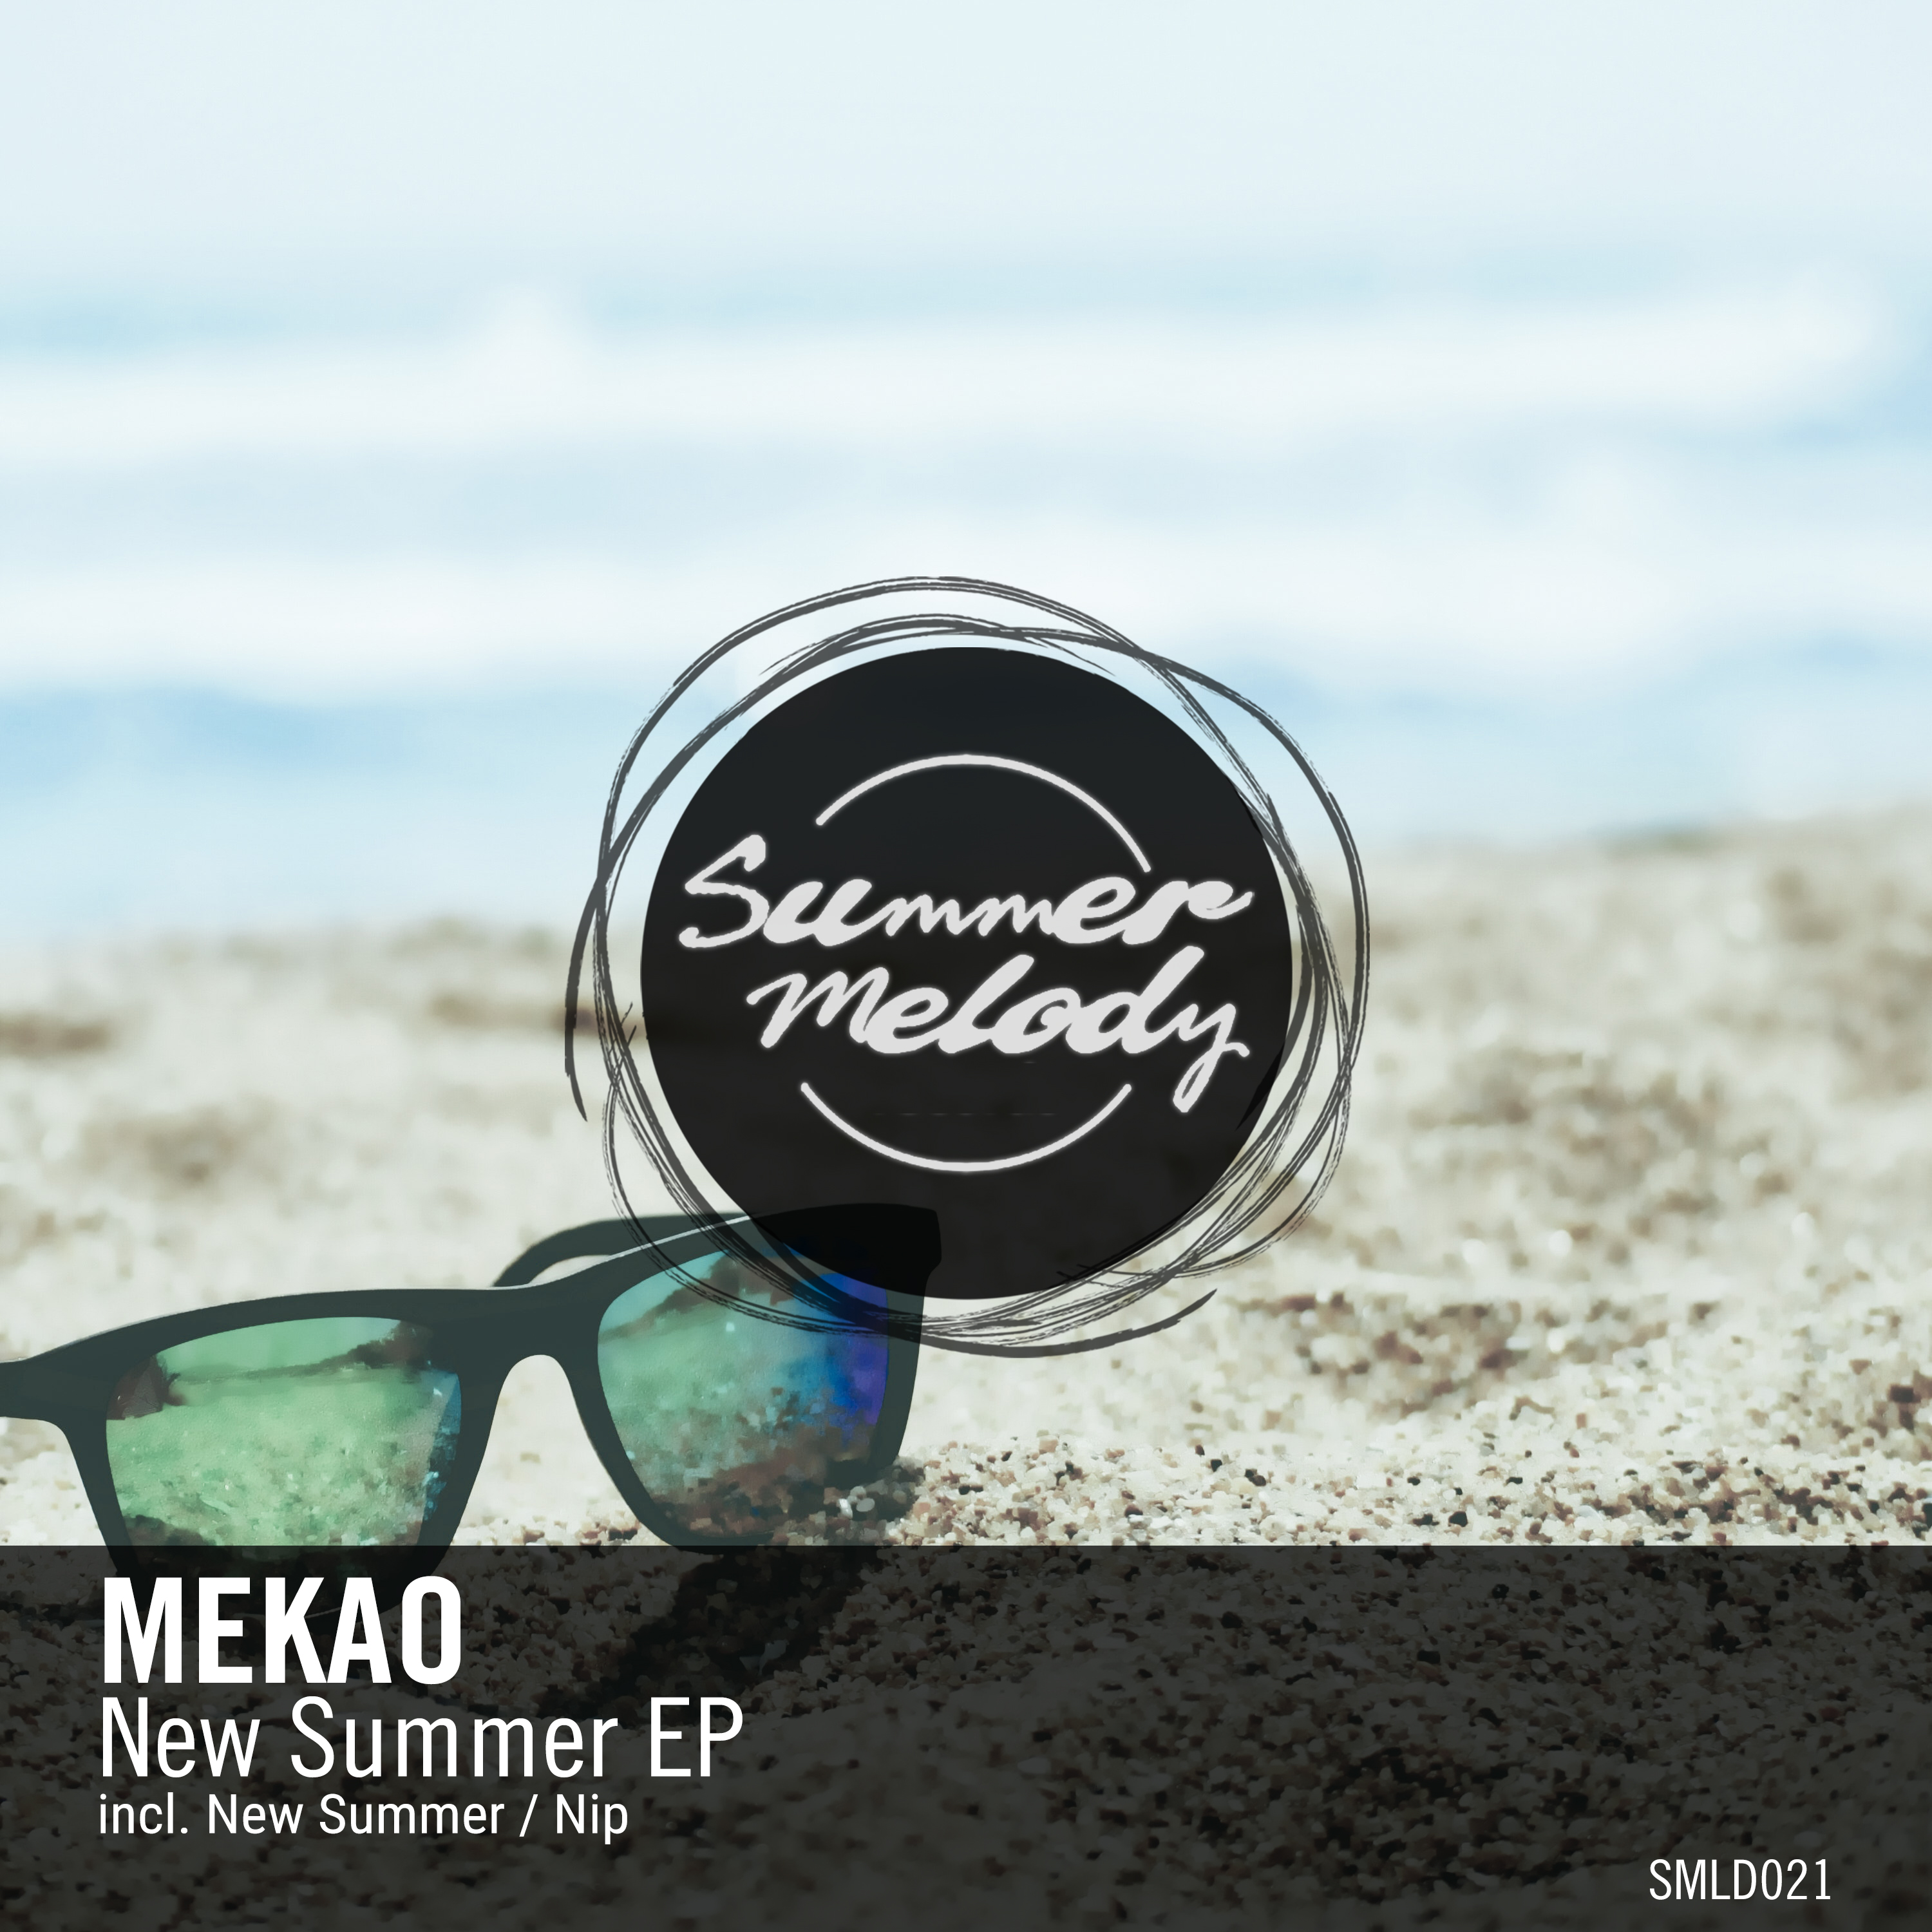 Mekao presents New Summer EP on Summer Melody Records